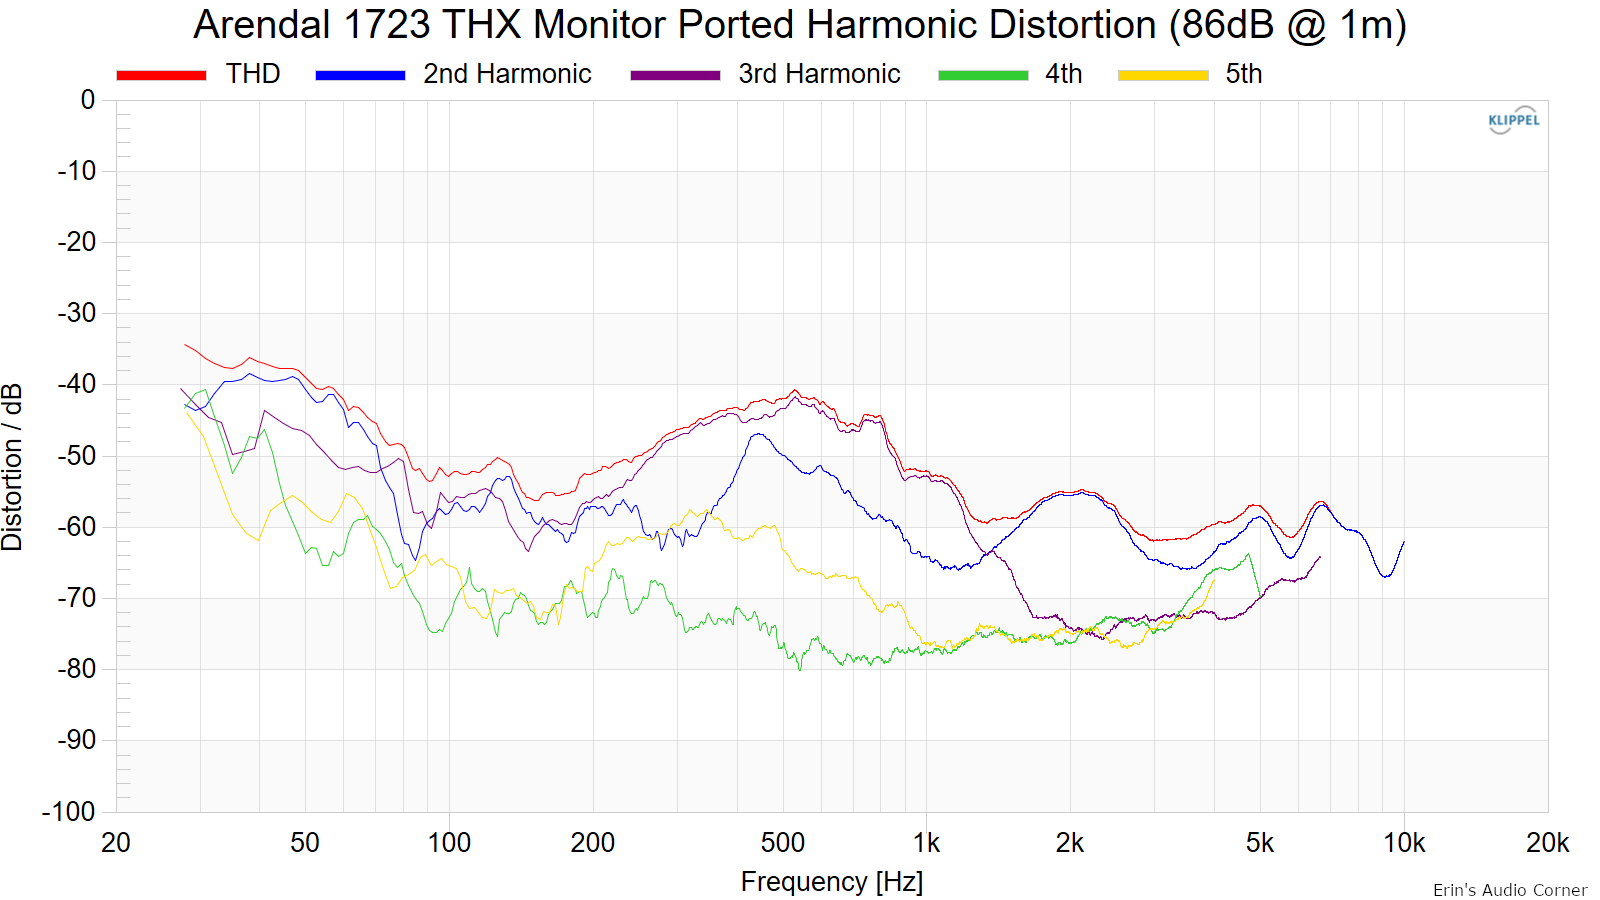 Arendal-1723-THX-Monitor-Ported-Harmonic-Distortion-86dB-1m.png